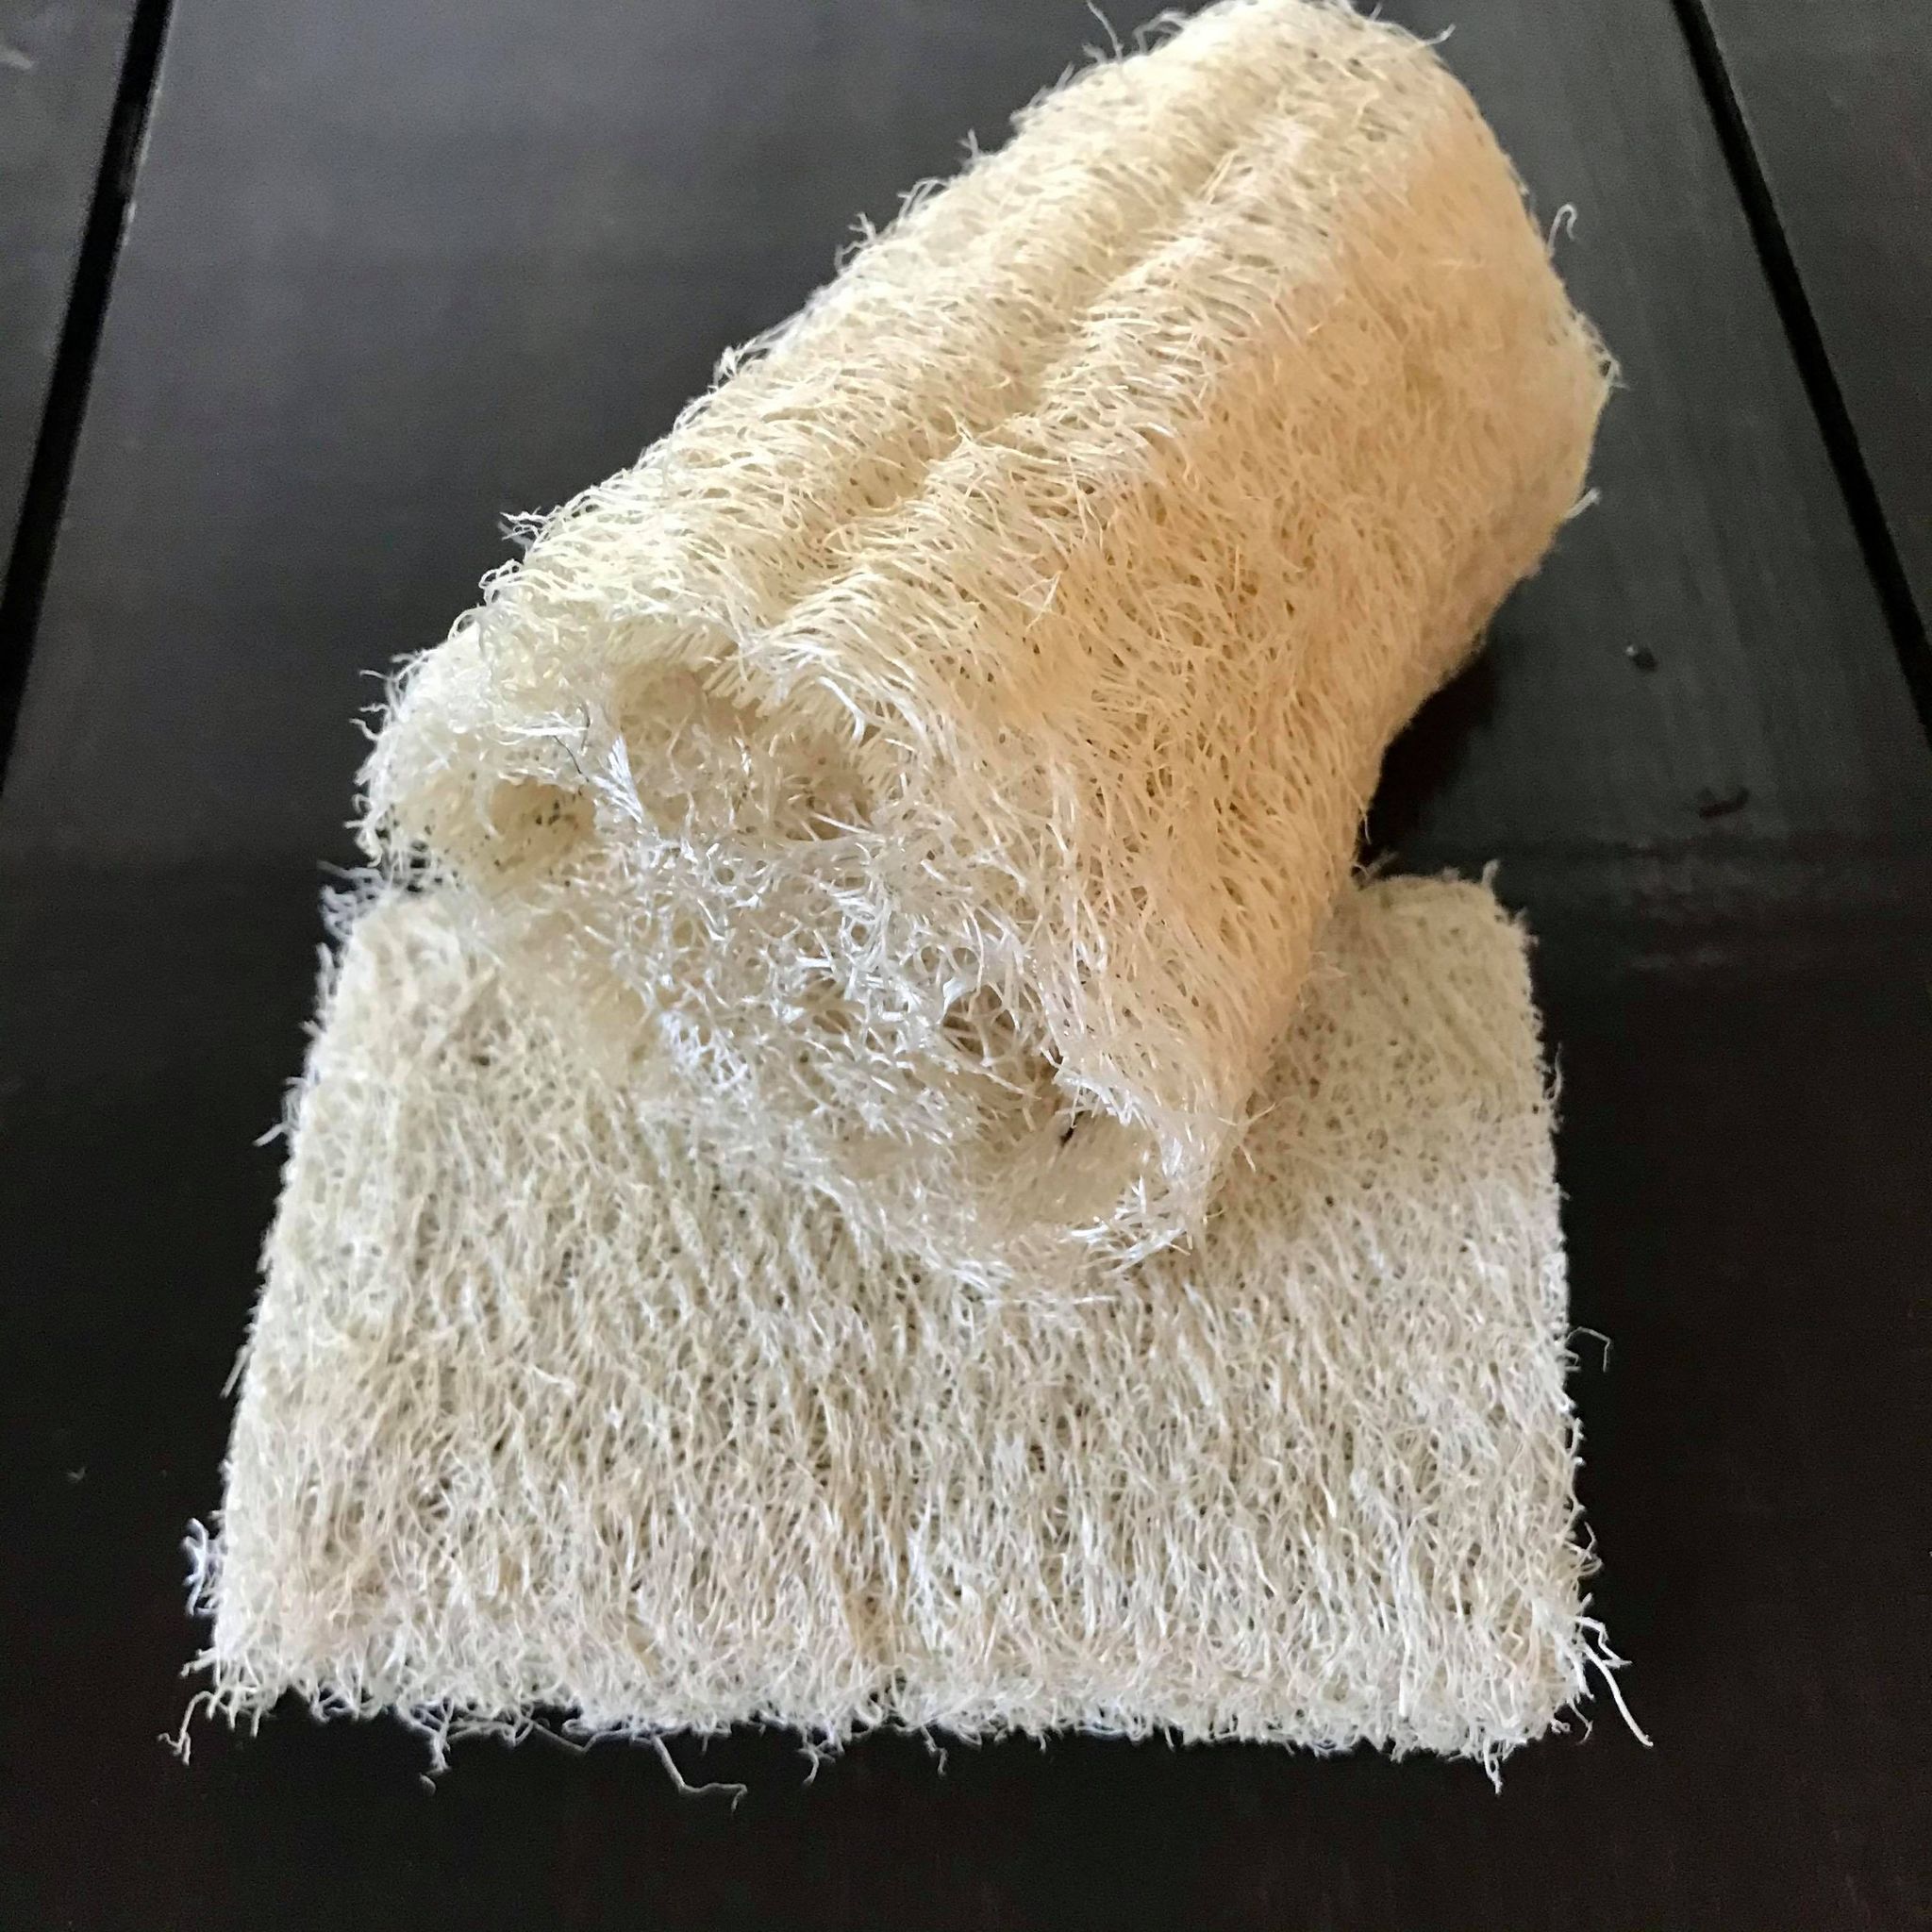 individual loofah scrubber shown dry and what it looks like after being soaked in water